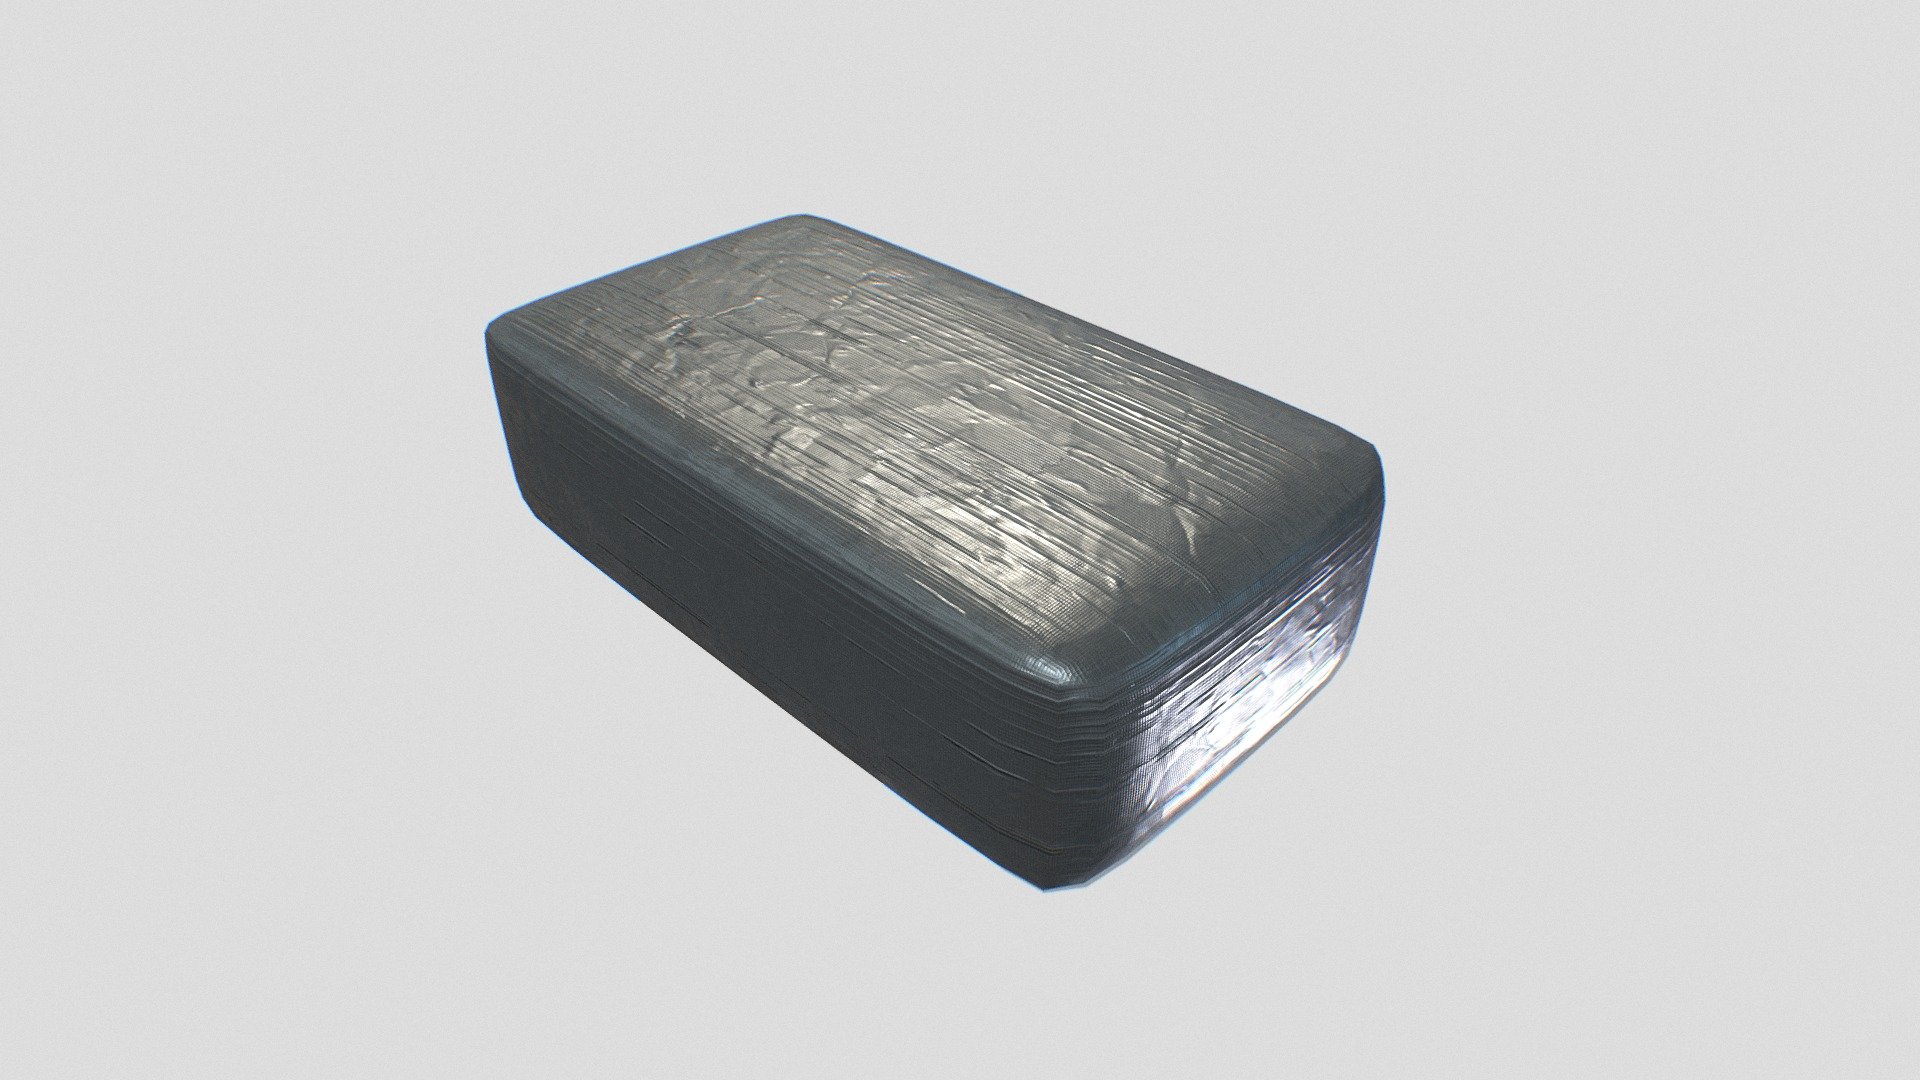 3d model of a Drug Brick Package Cut Low Poly Game Ready

This model is suitable for use in (game engines, broadcast, high-res film closeups, advertising, animations, visualisations)

FEATURES:

-High quality polygonal model, correctly scaled for an accurate representation.

-Models resolutions are optimized for polygon efficiency.

-Model is fully textured with all materials applied

-Units Used cm

TEXTURES

4k color normal metal rough (pbr) - Drug Brick Simple - Buy Royalty Free 3D model by Pbr_Studio (@pbr.game.ready) 3d model